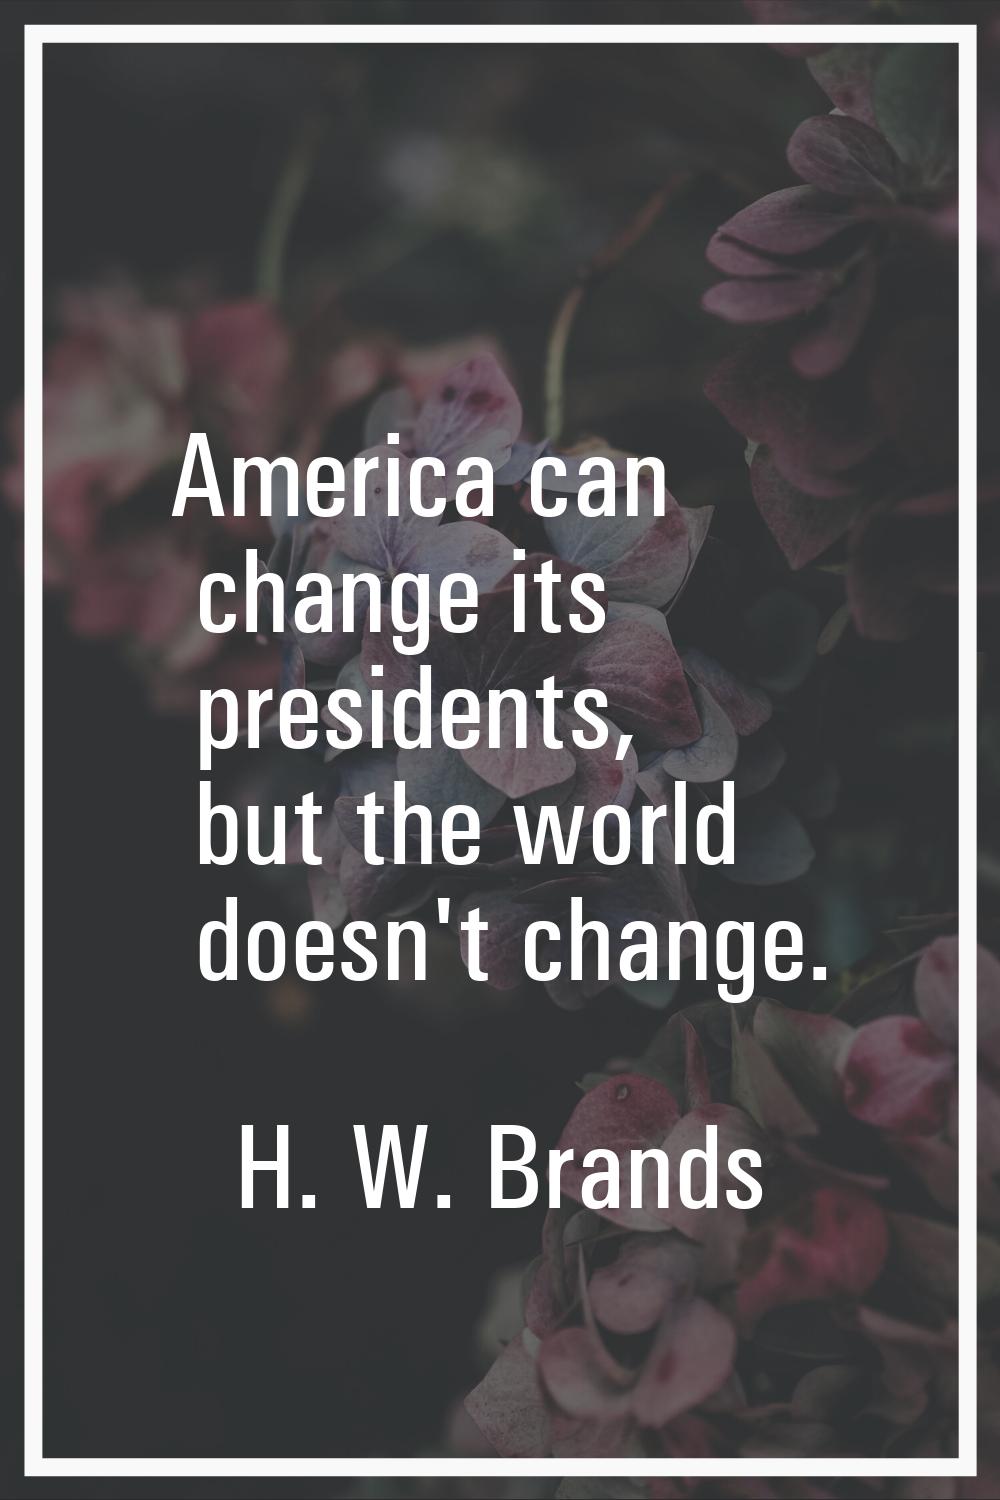 America can change its presidents, but the world doesn't change.